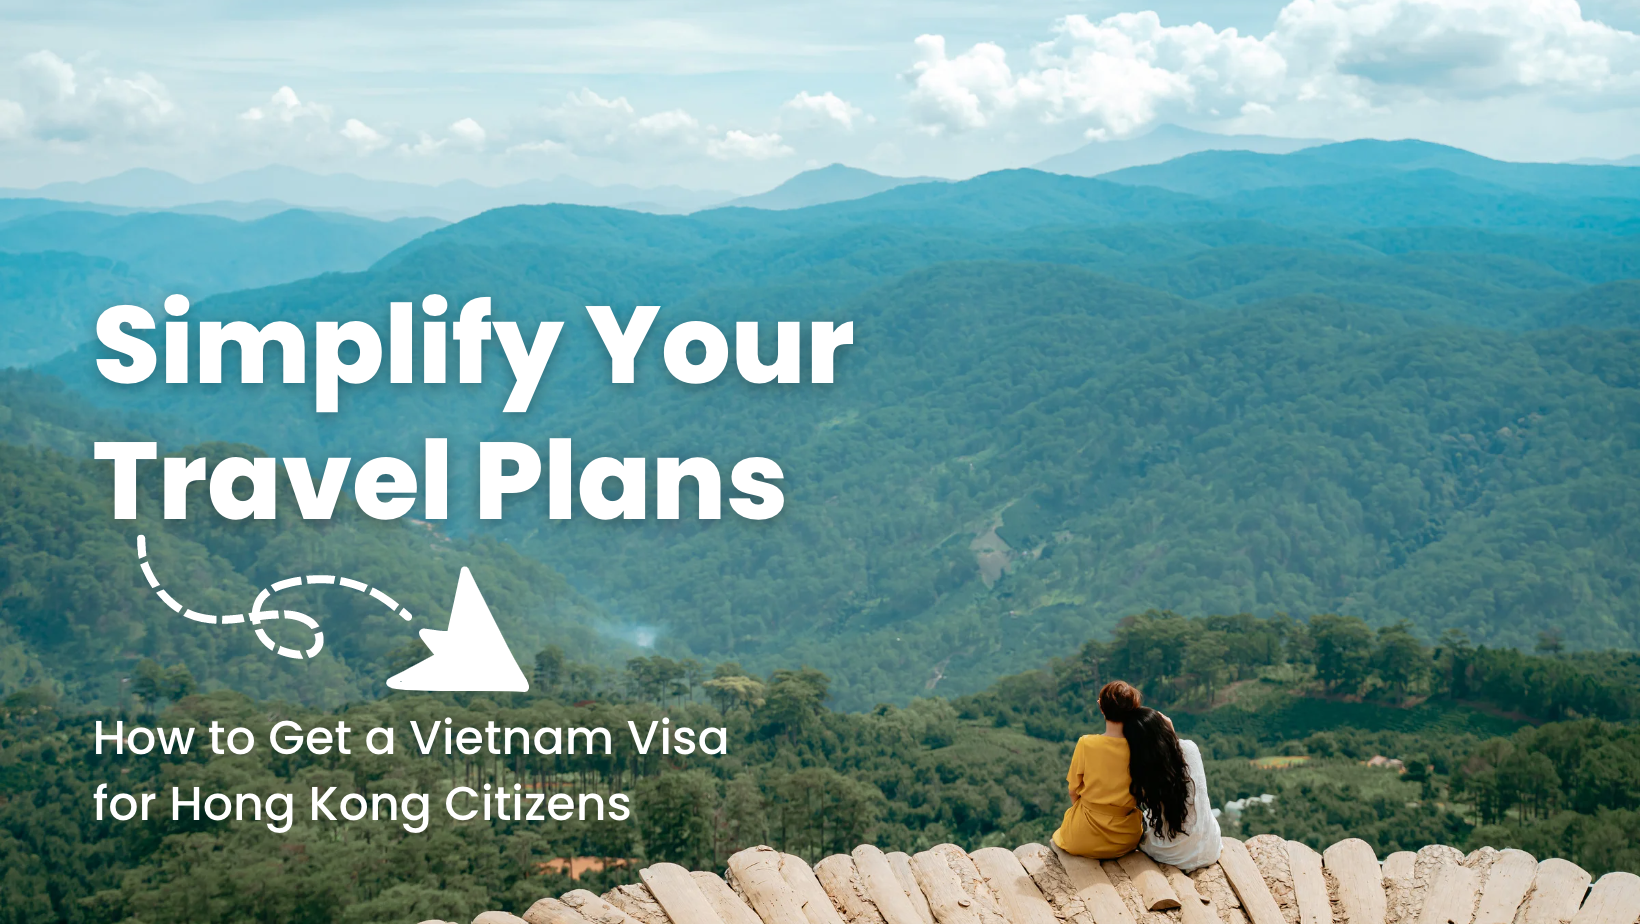 Simplify Your Travel Plans: How to Get a Vietnam Visa for Hong Kong Citizens